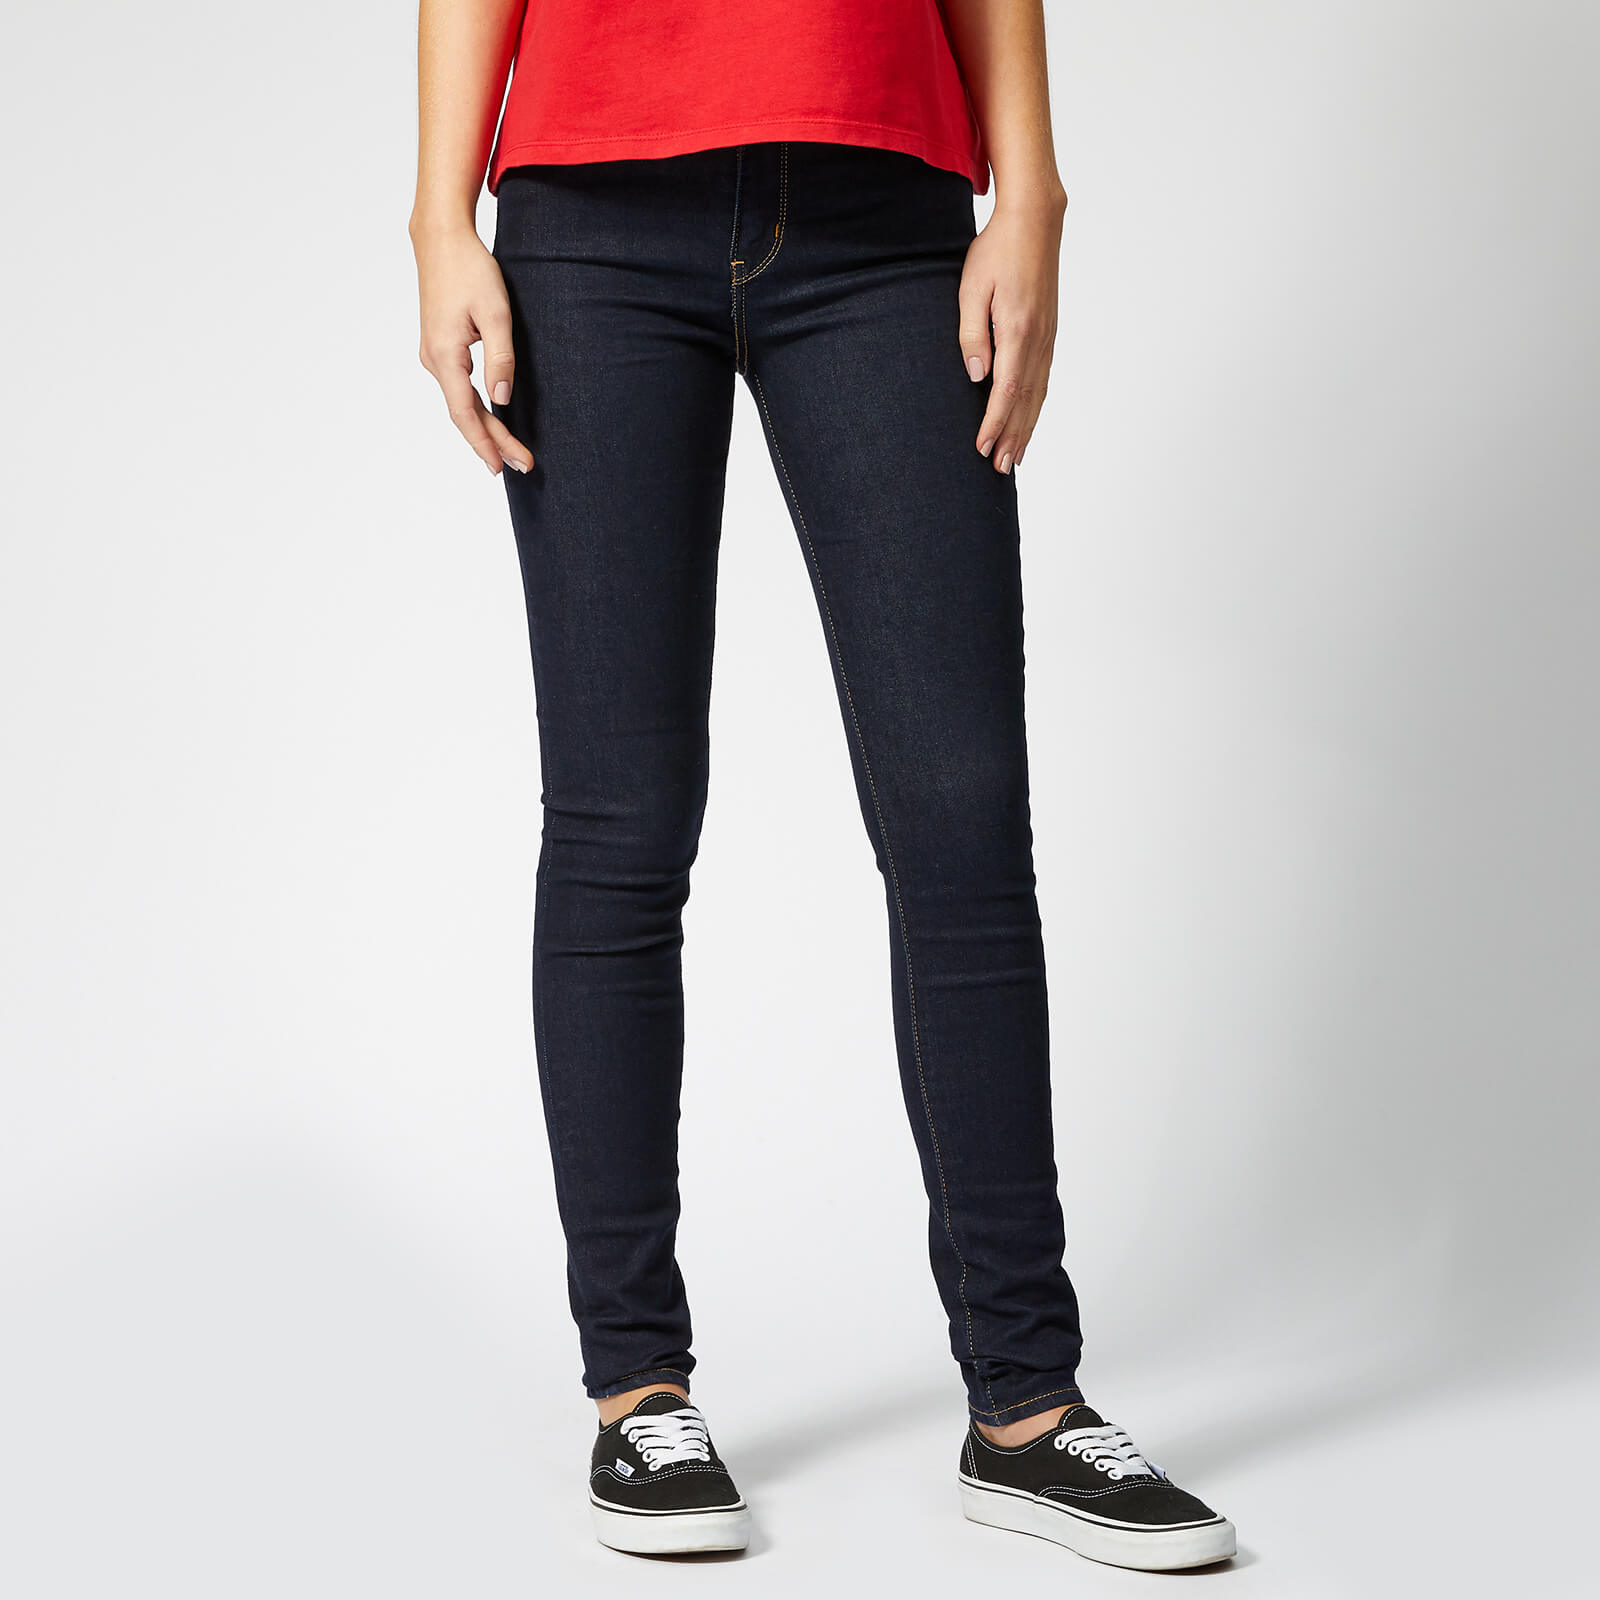 Levi's Women's 721 High Rise Skinny Jeans - To The Nine - W27/L30